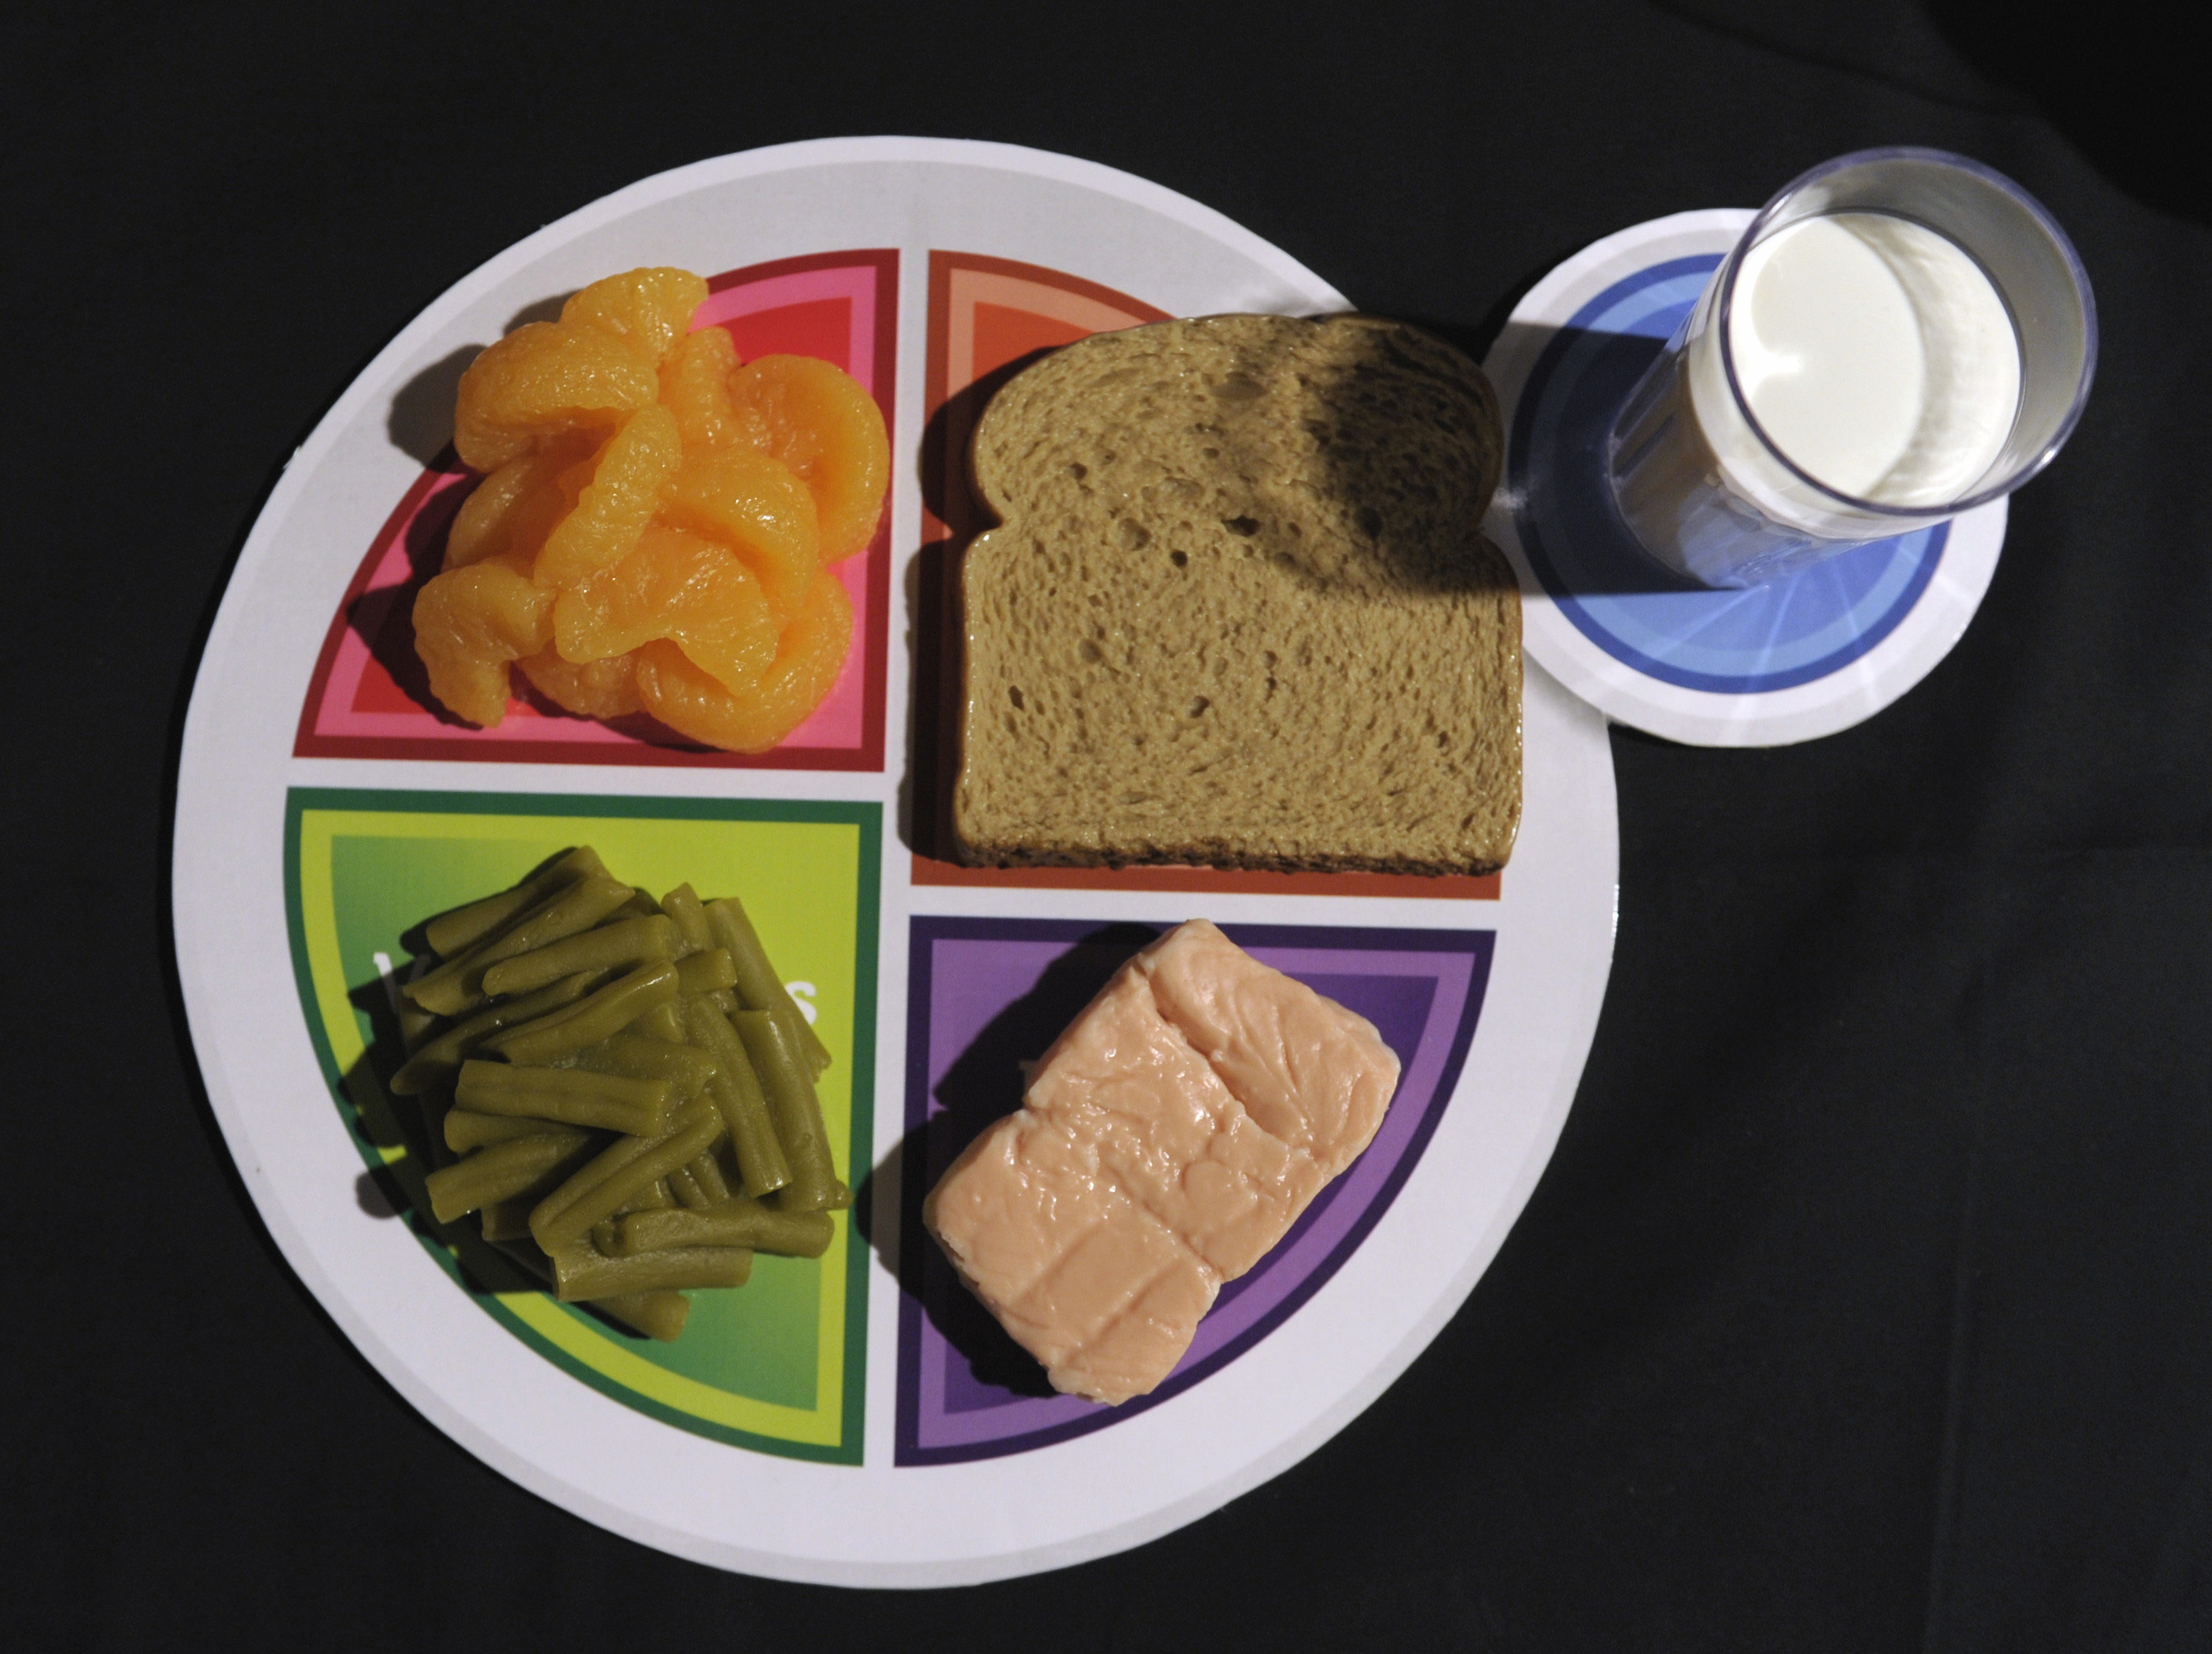 Michelle Obama Captions - MyPlate? Few Americans know or heed US nutrition guide